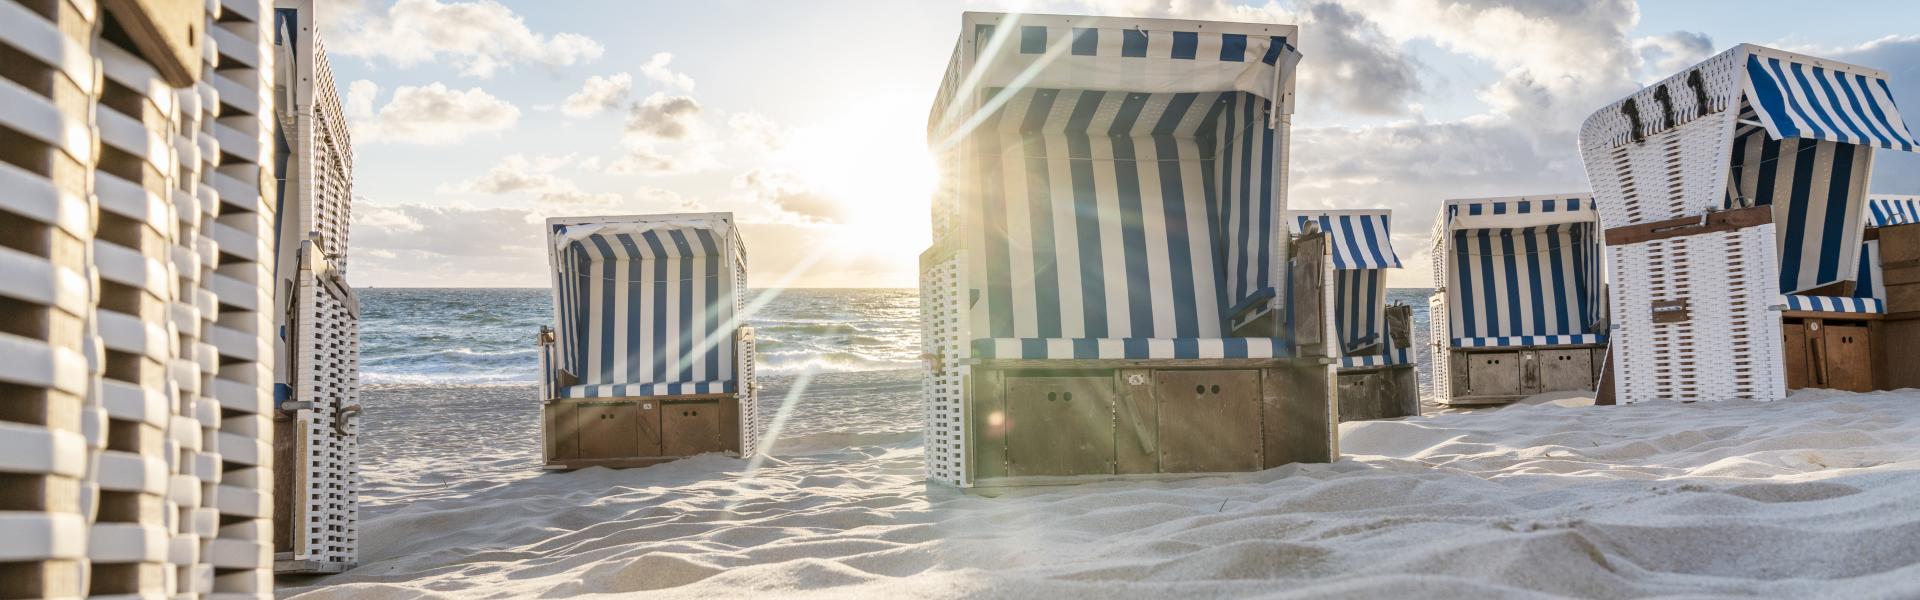 List, Schleswig Holstein, Germany - May 28, 2019 : Beach chairs are typical for German beaches